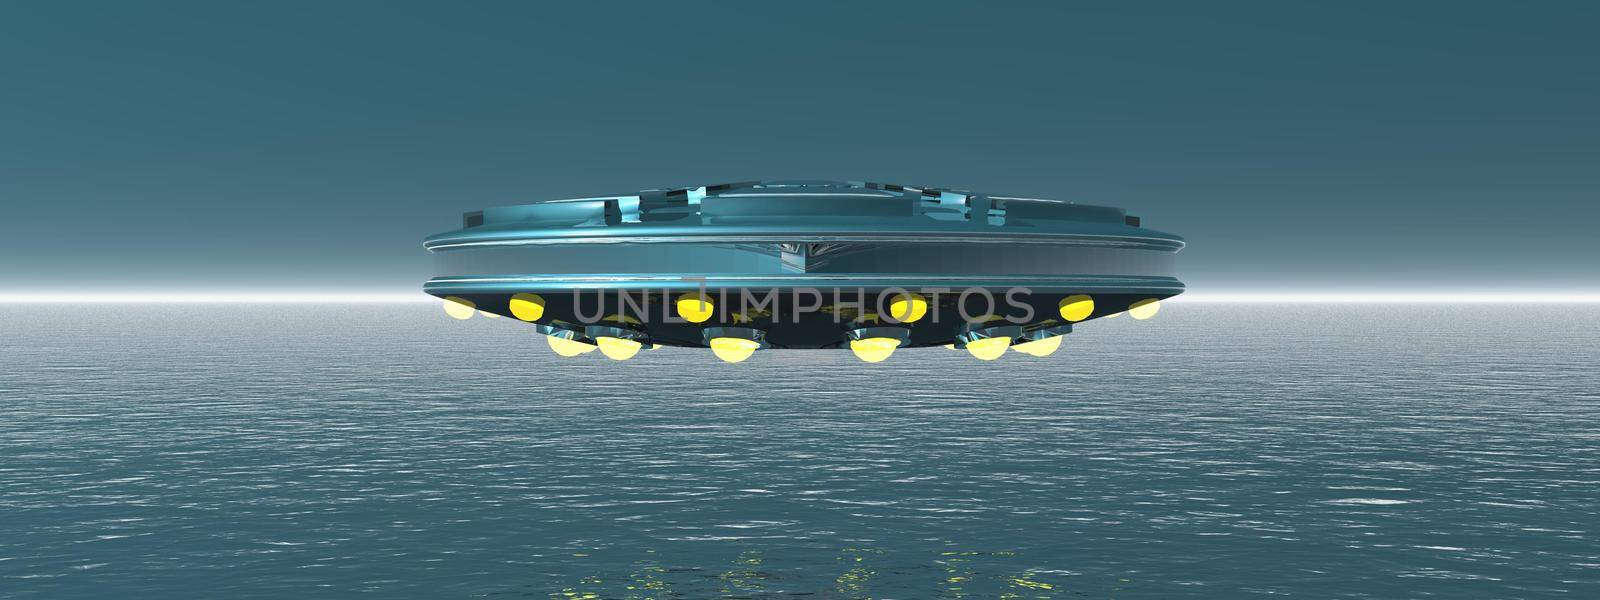 very large flying saucer in the sky - 3d rendering by mariephotos